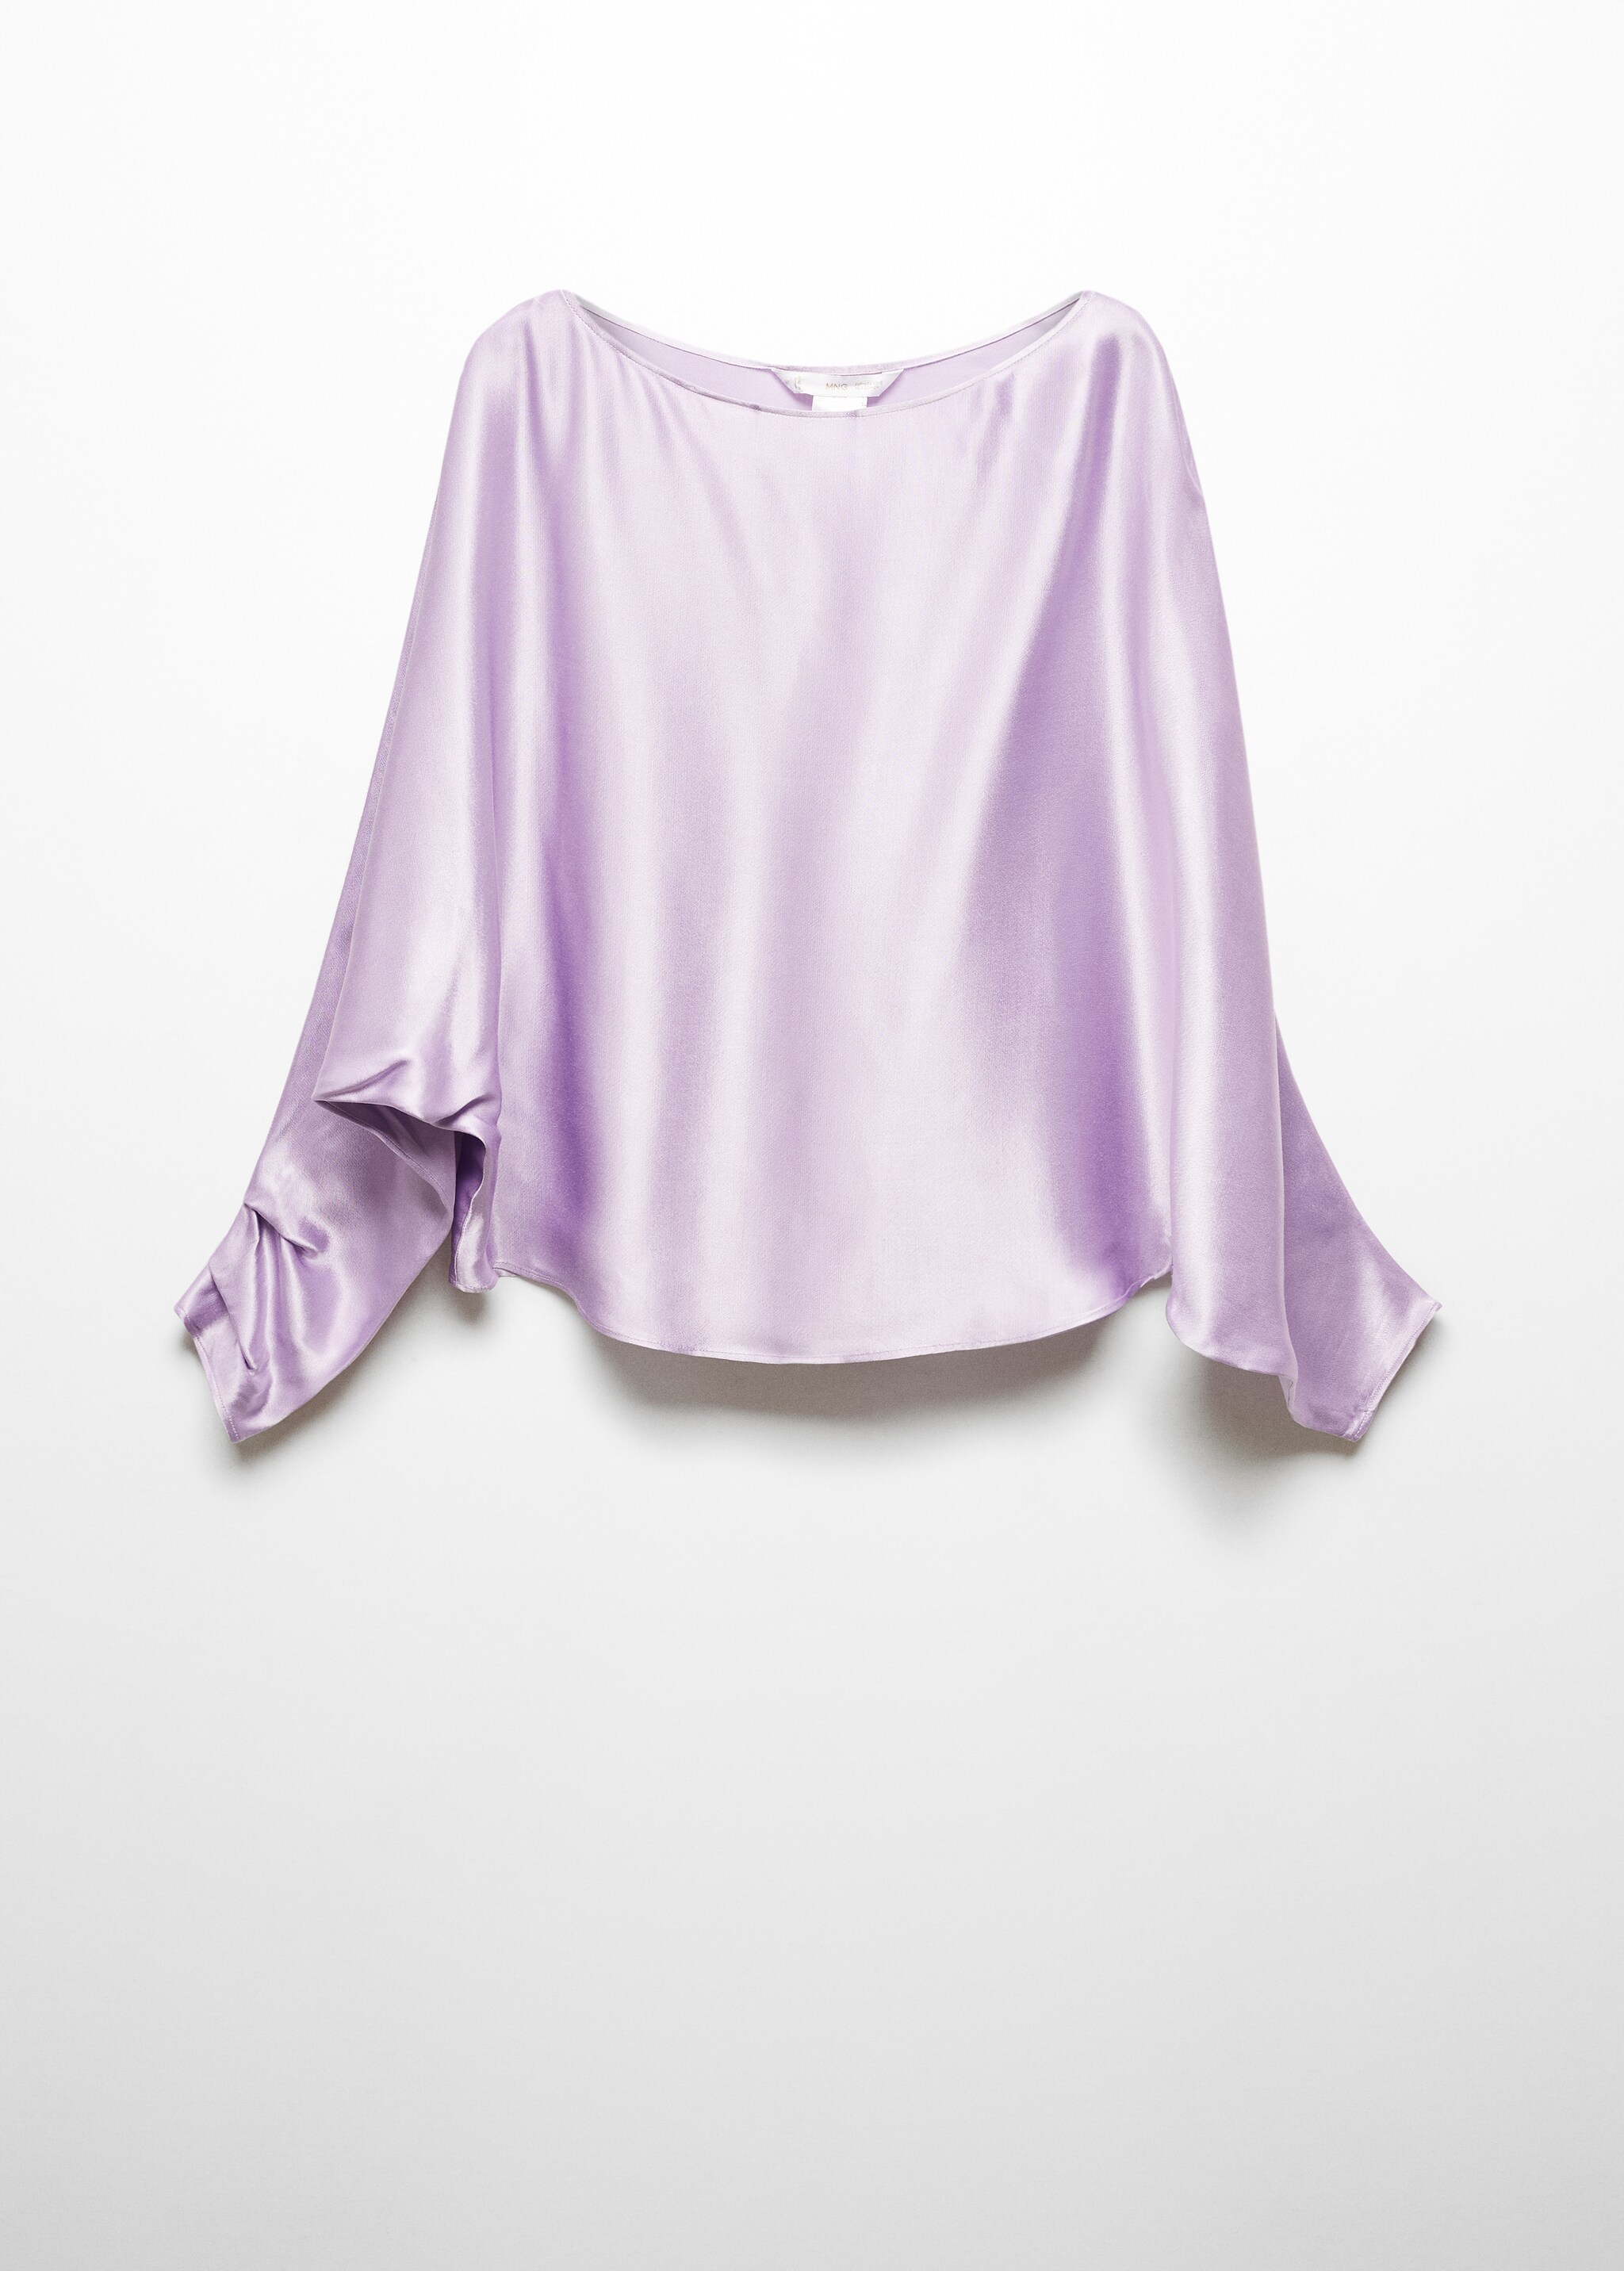 Satin cape style blouse  - Article without model